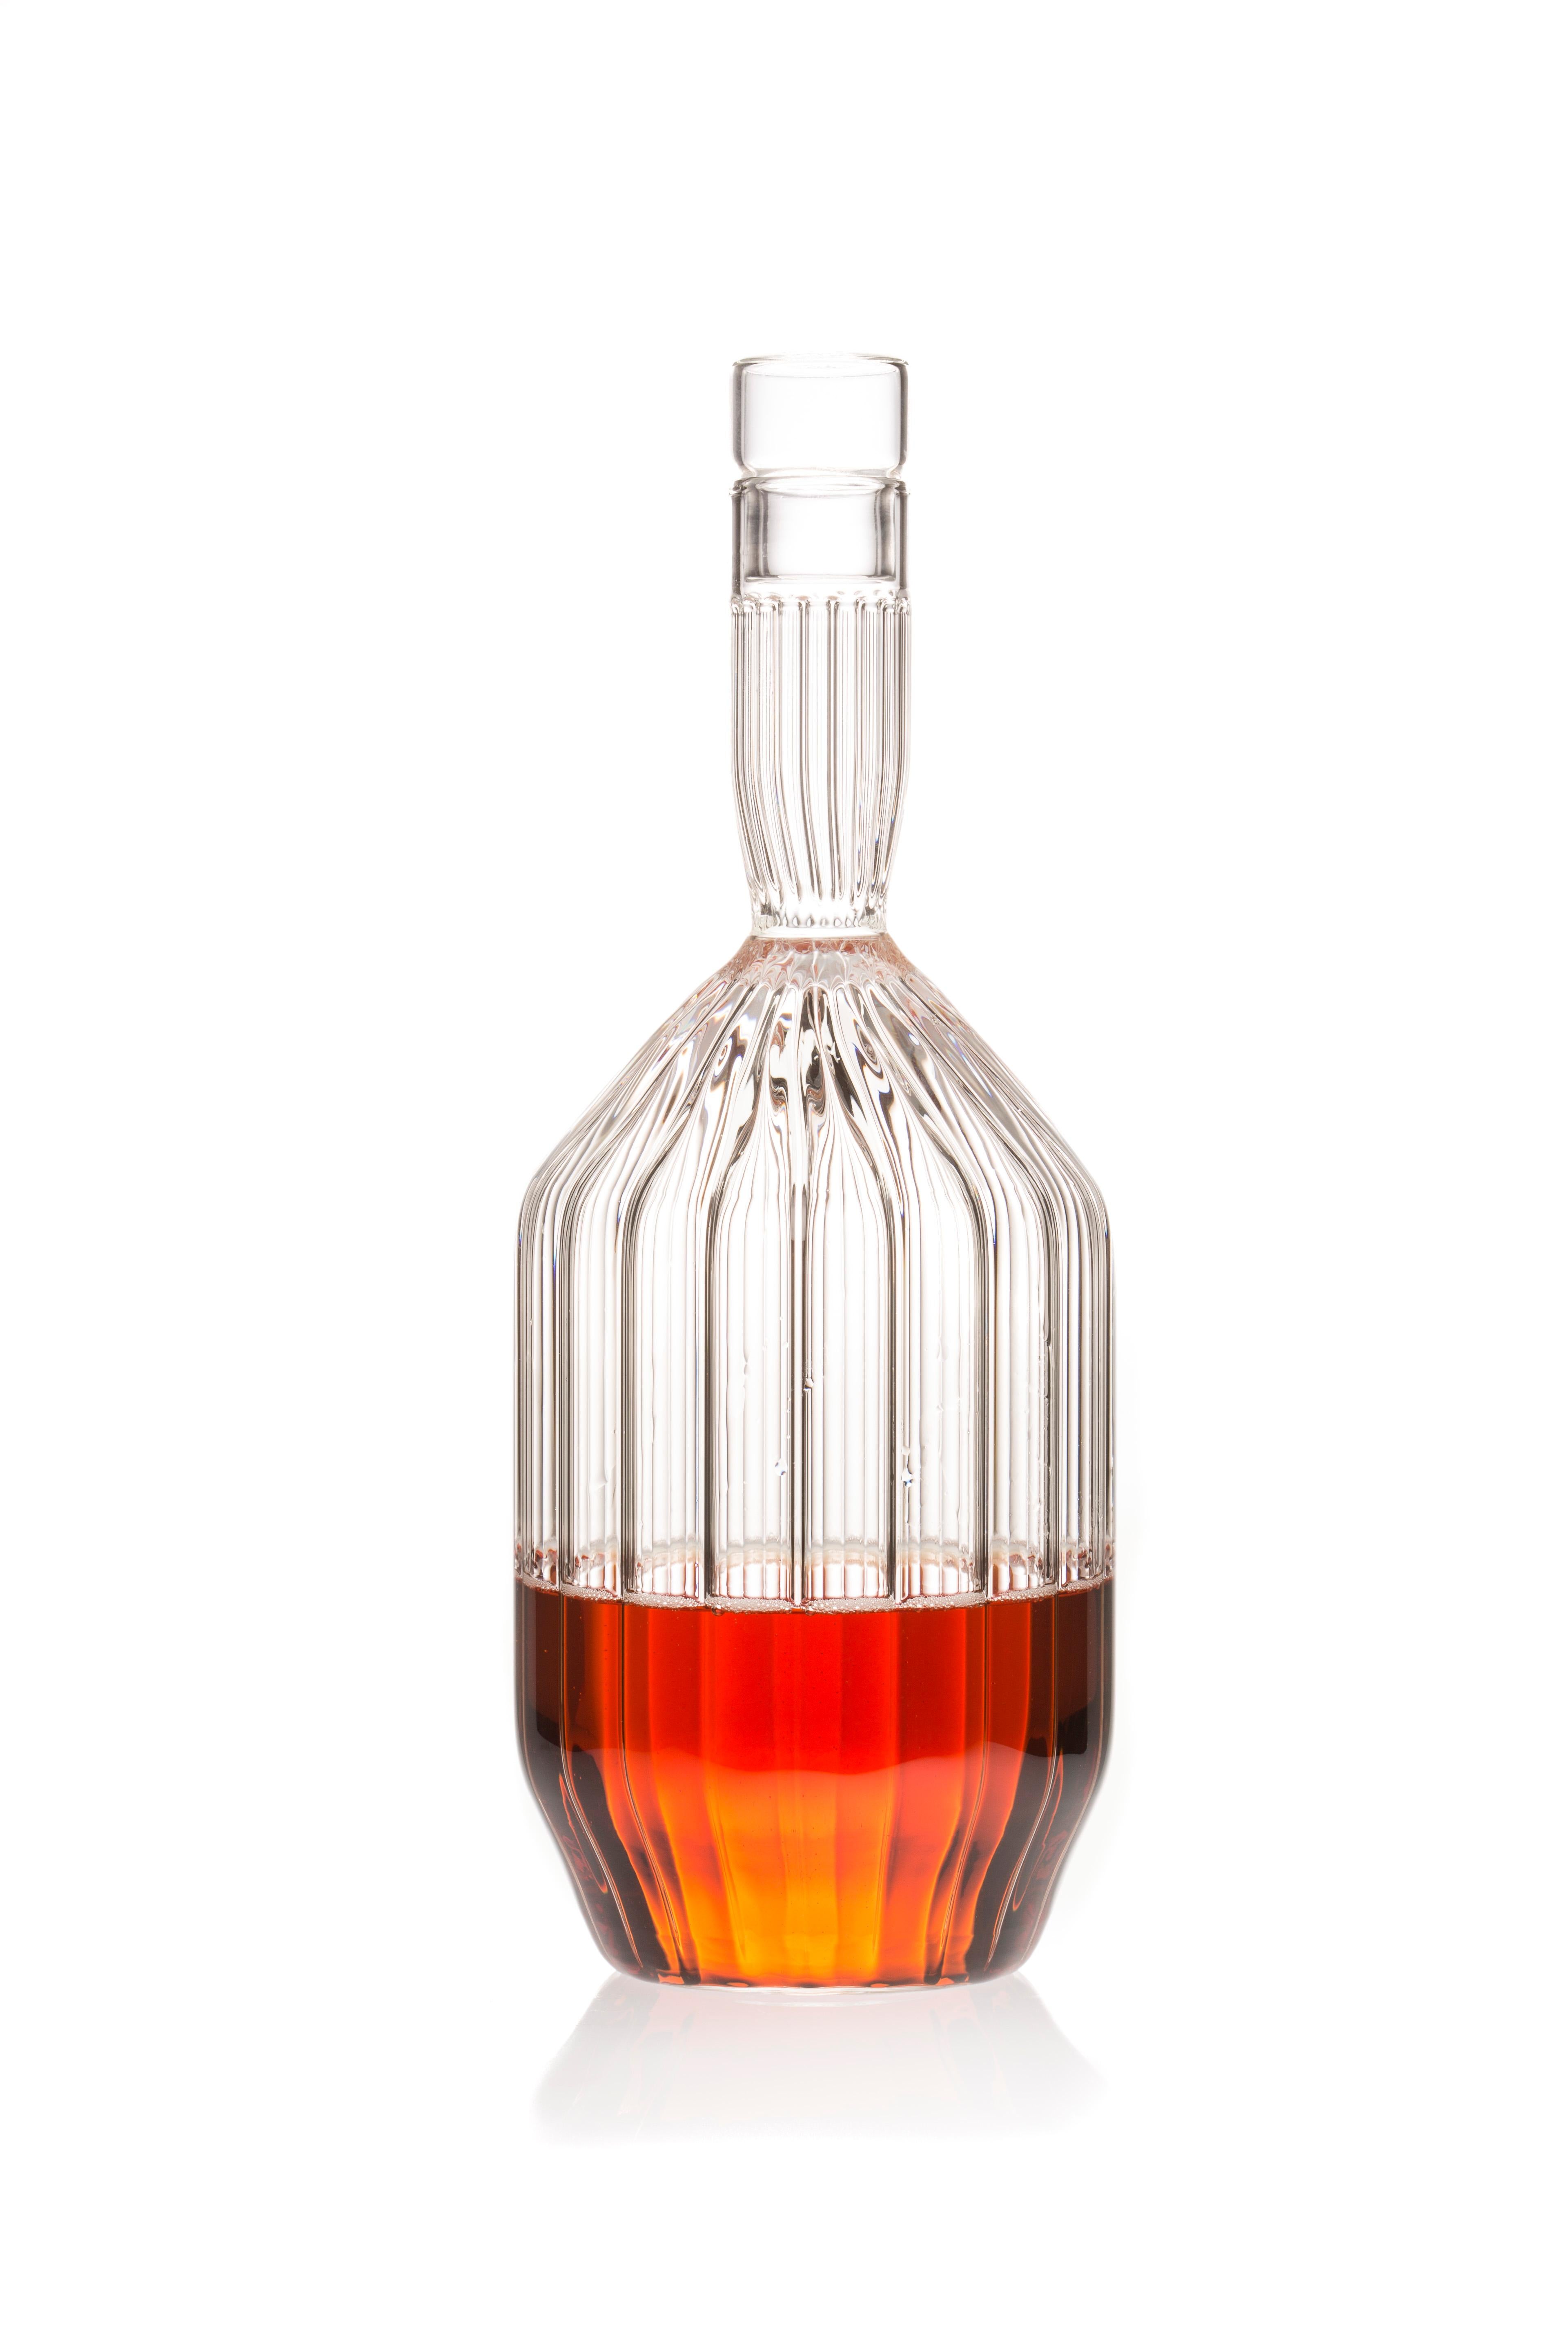 Margot Decanter and four Dearborn wine glasses

Entirely hand-formed without the use of molds, the contemporary minimal Margot Decanter is an ideal companion to any evening spent enjoying your favorite port, scotch, bourbon, or other liqueur. With